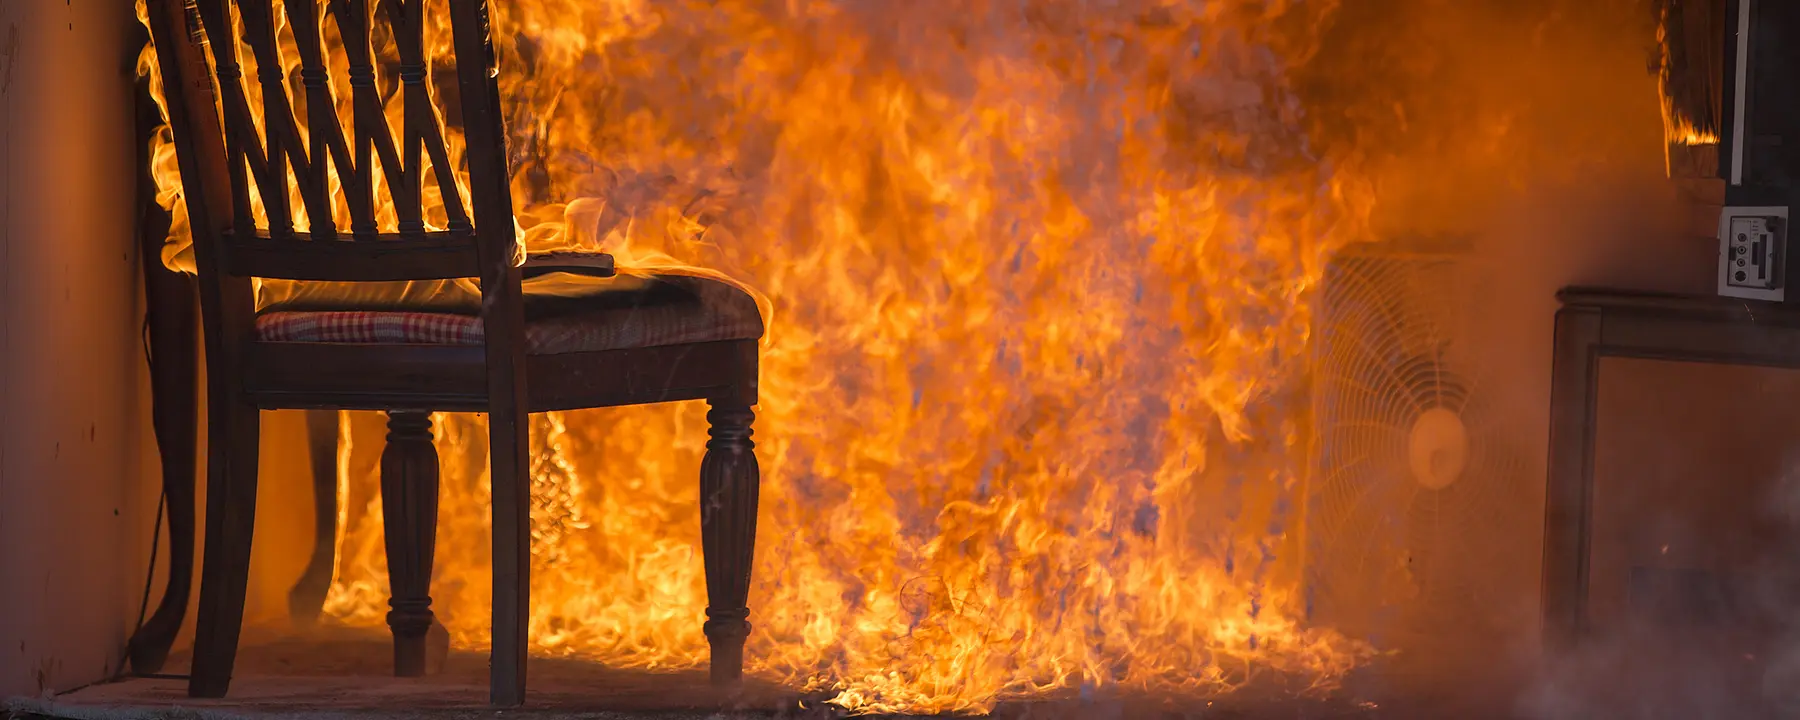 Chair in a room on fire